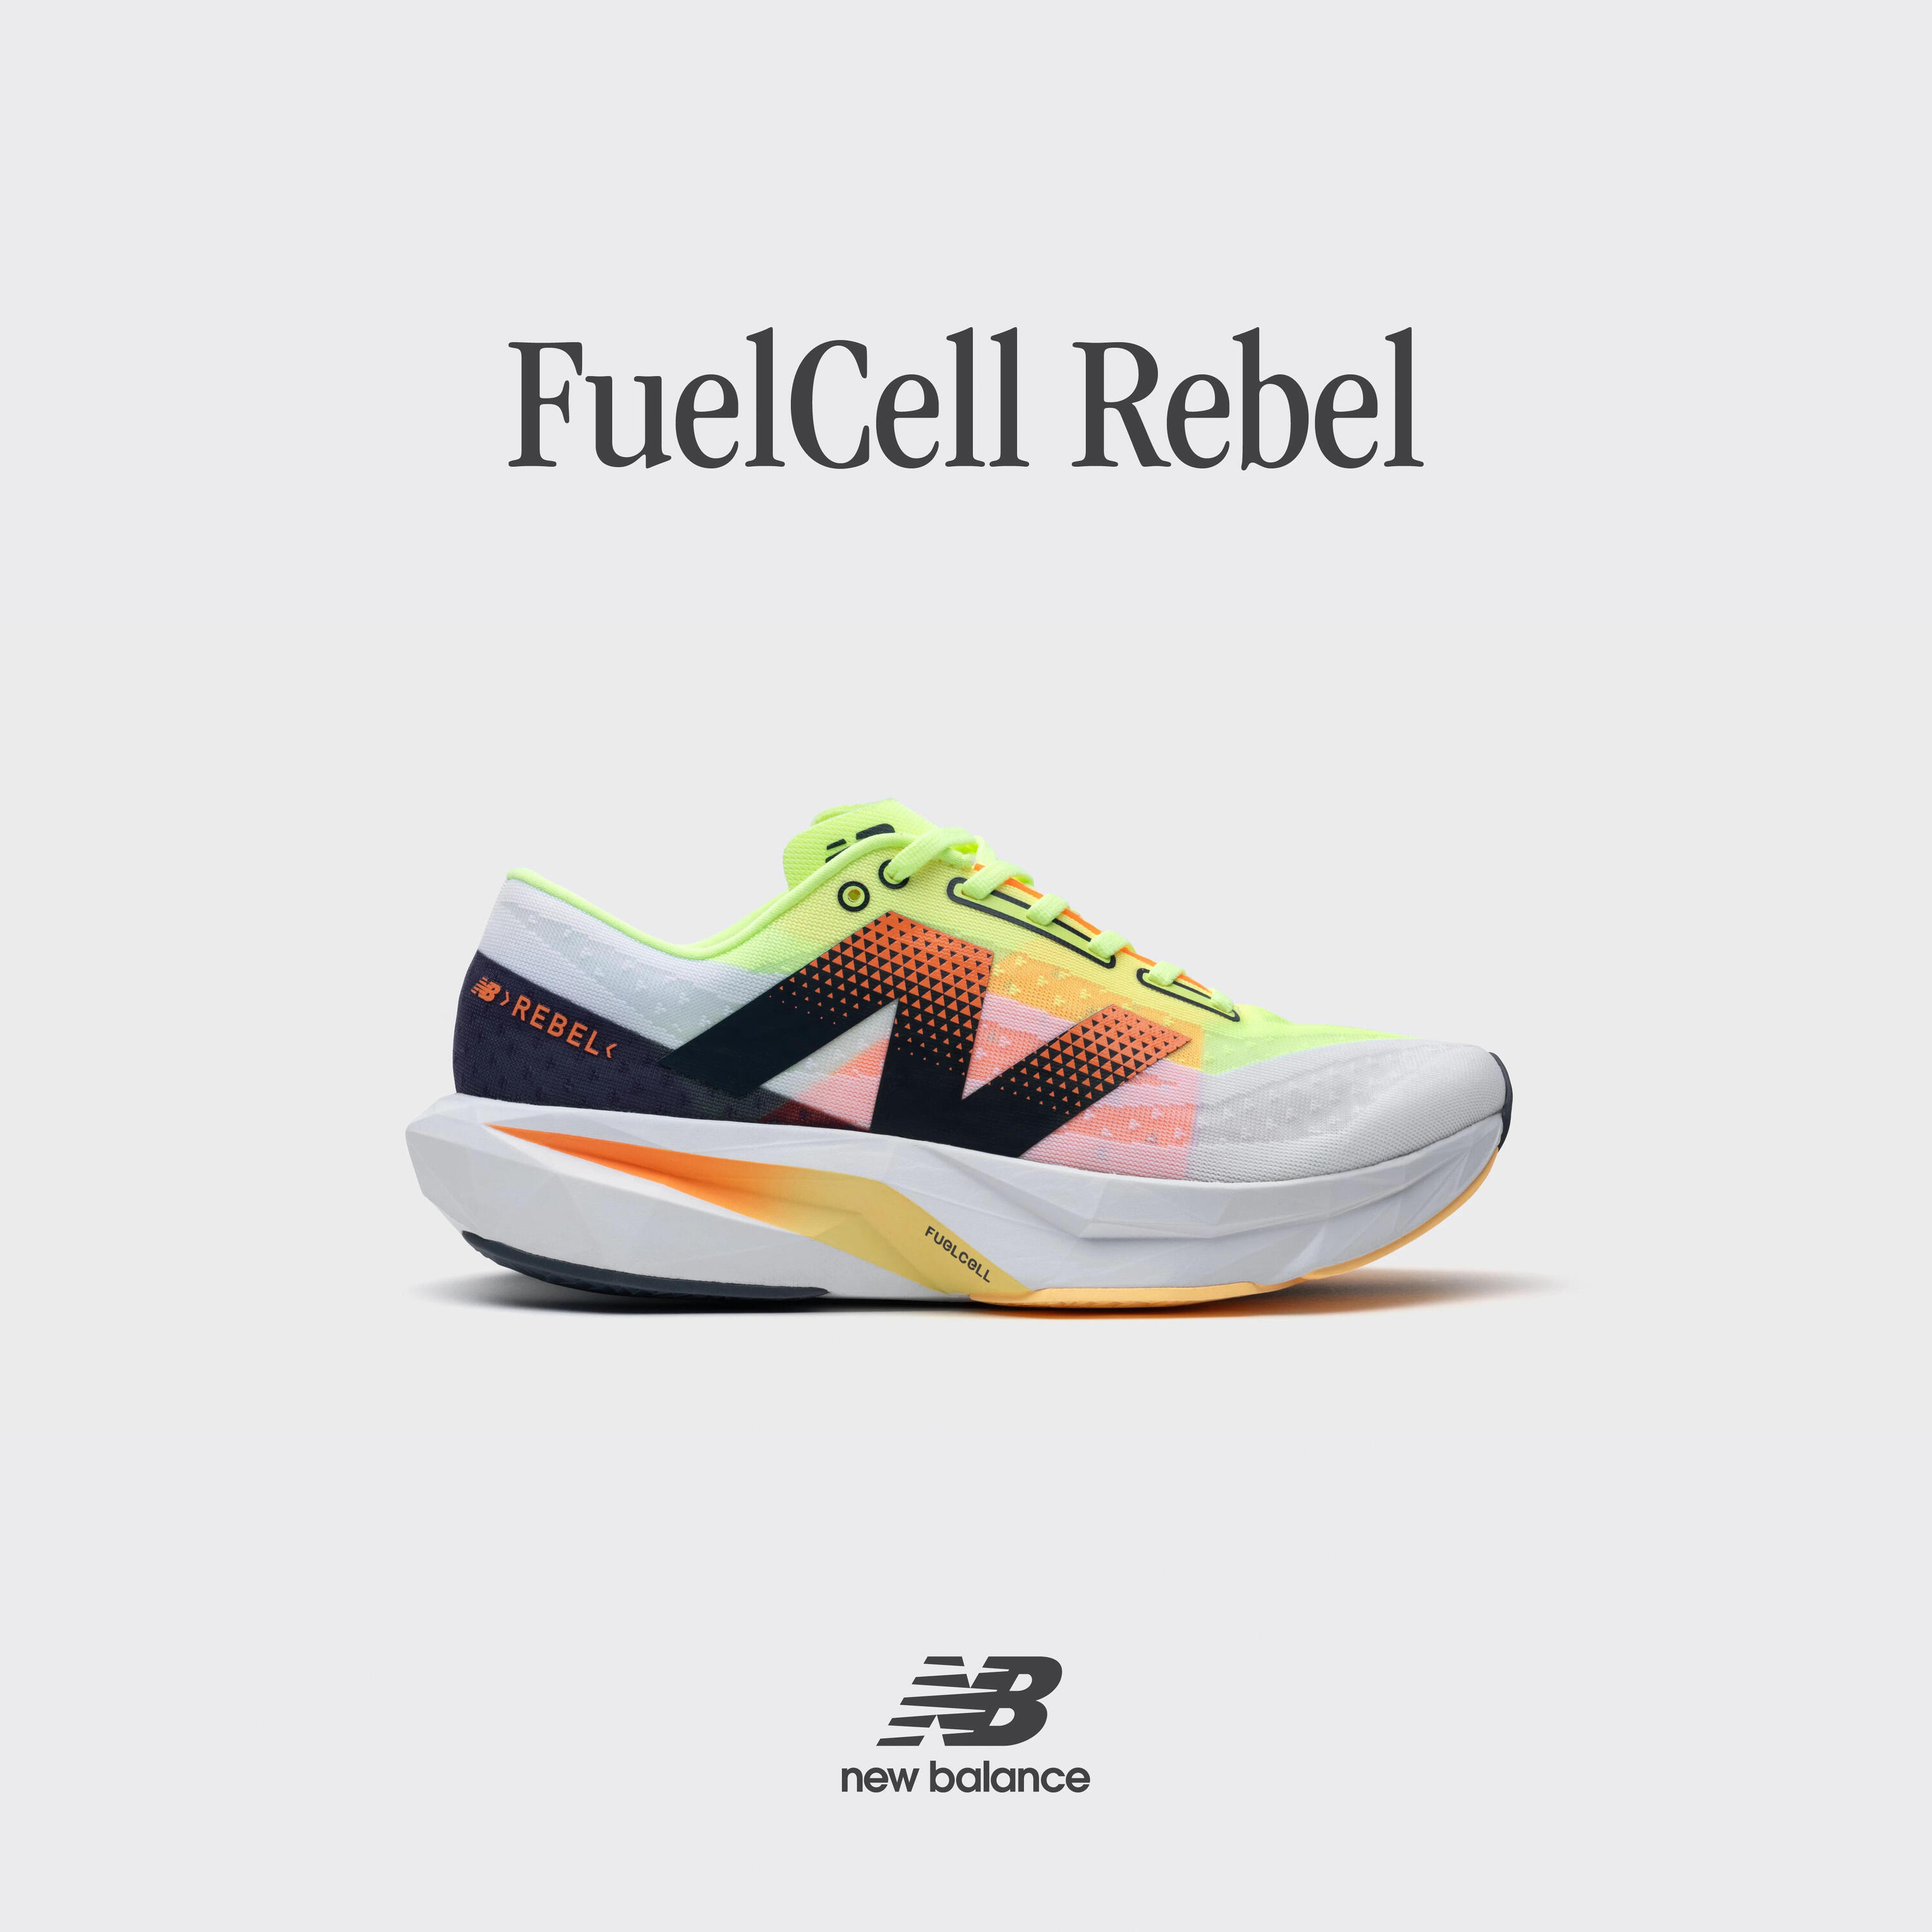 MEN'S NEW BALANCE FUELCELL REBEL V4 RUNNING SHOES - WHITE AND MULTICOLOURED 9/9